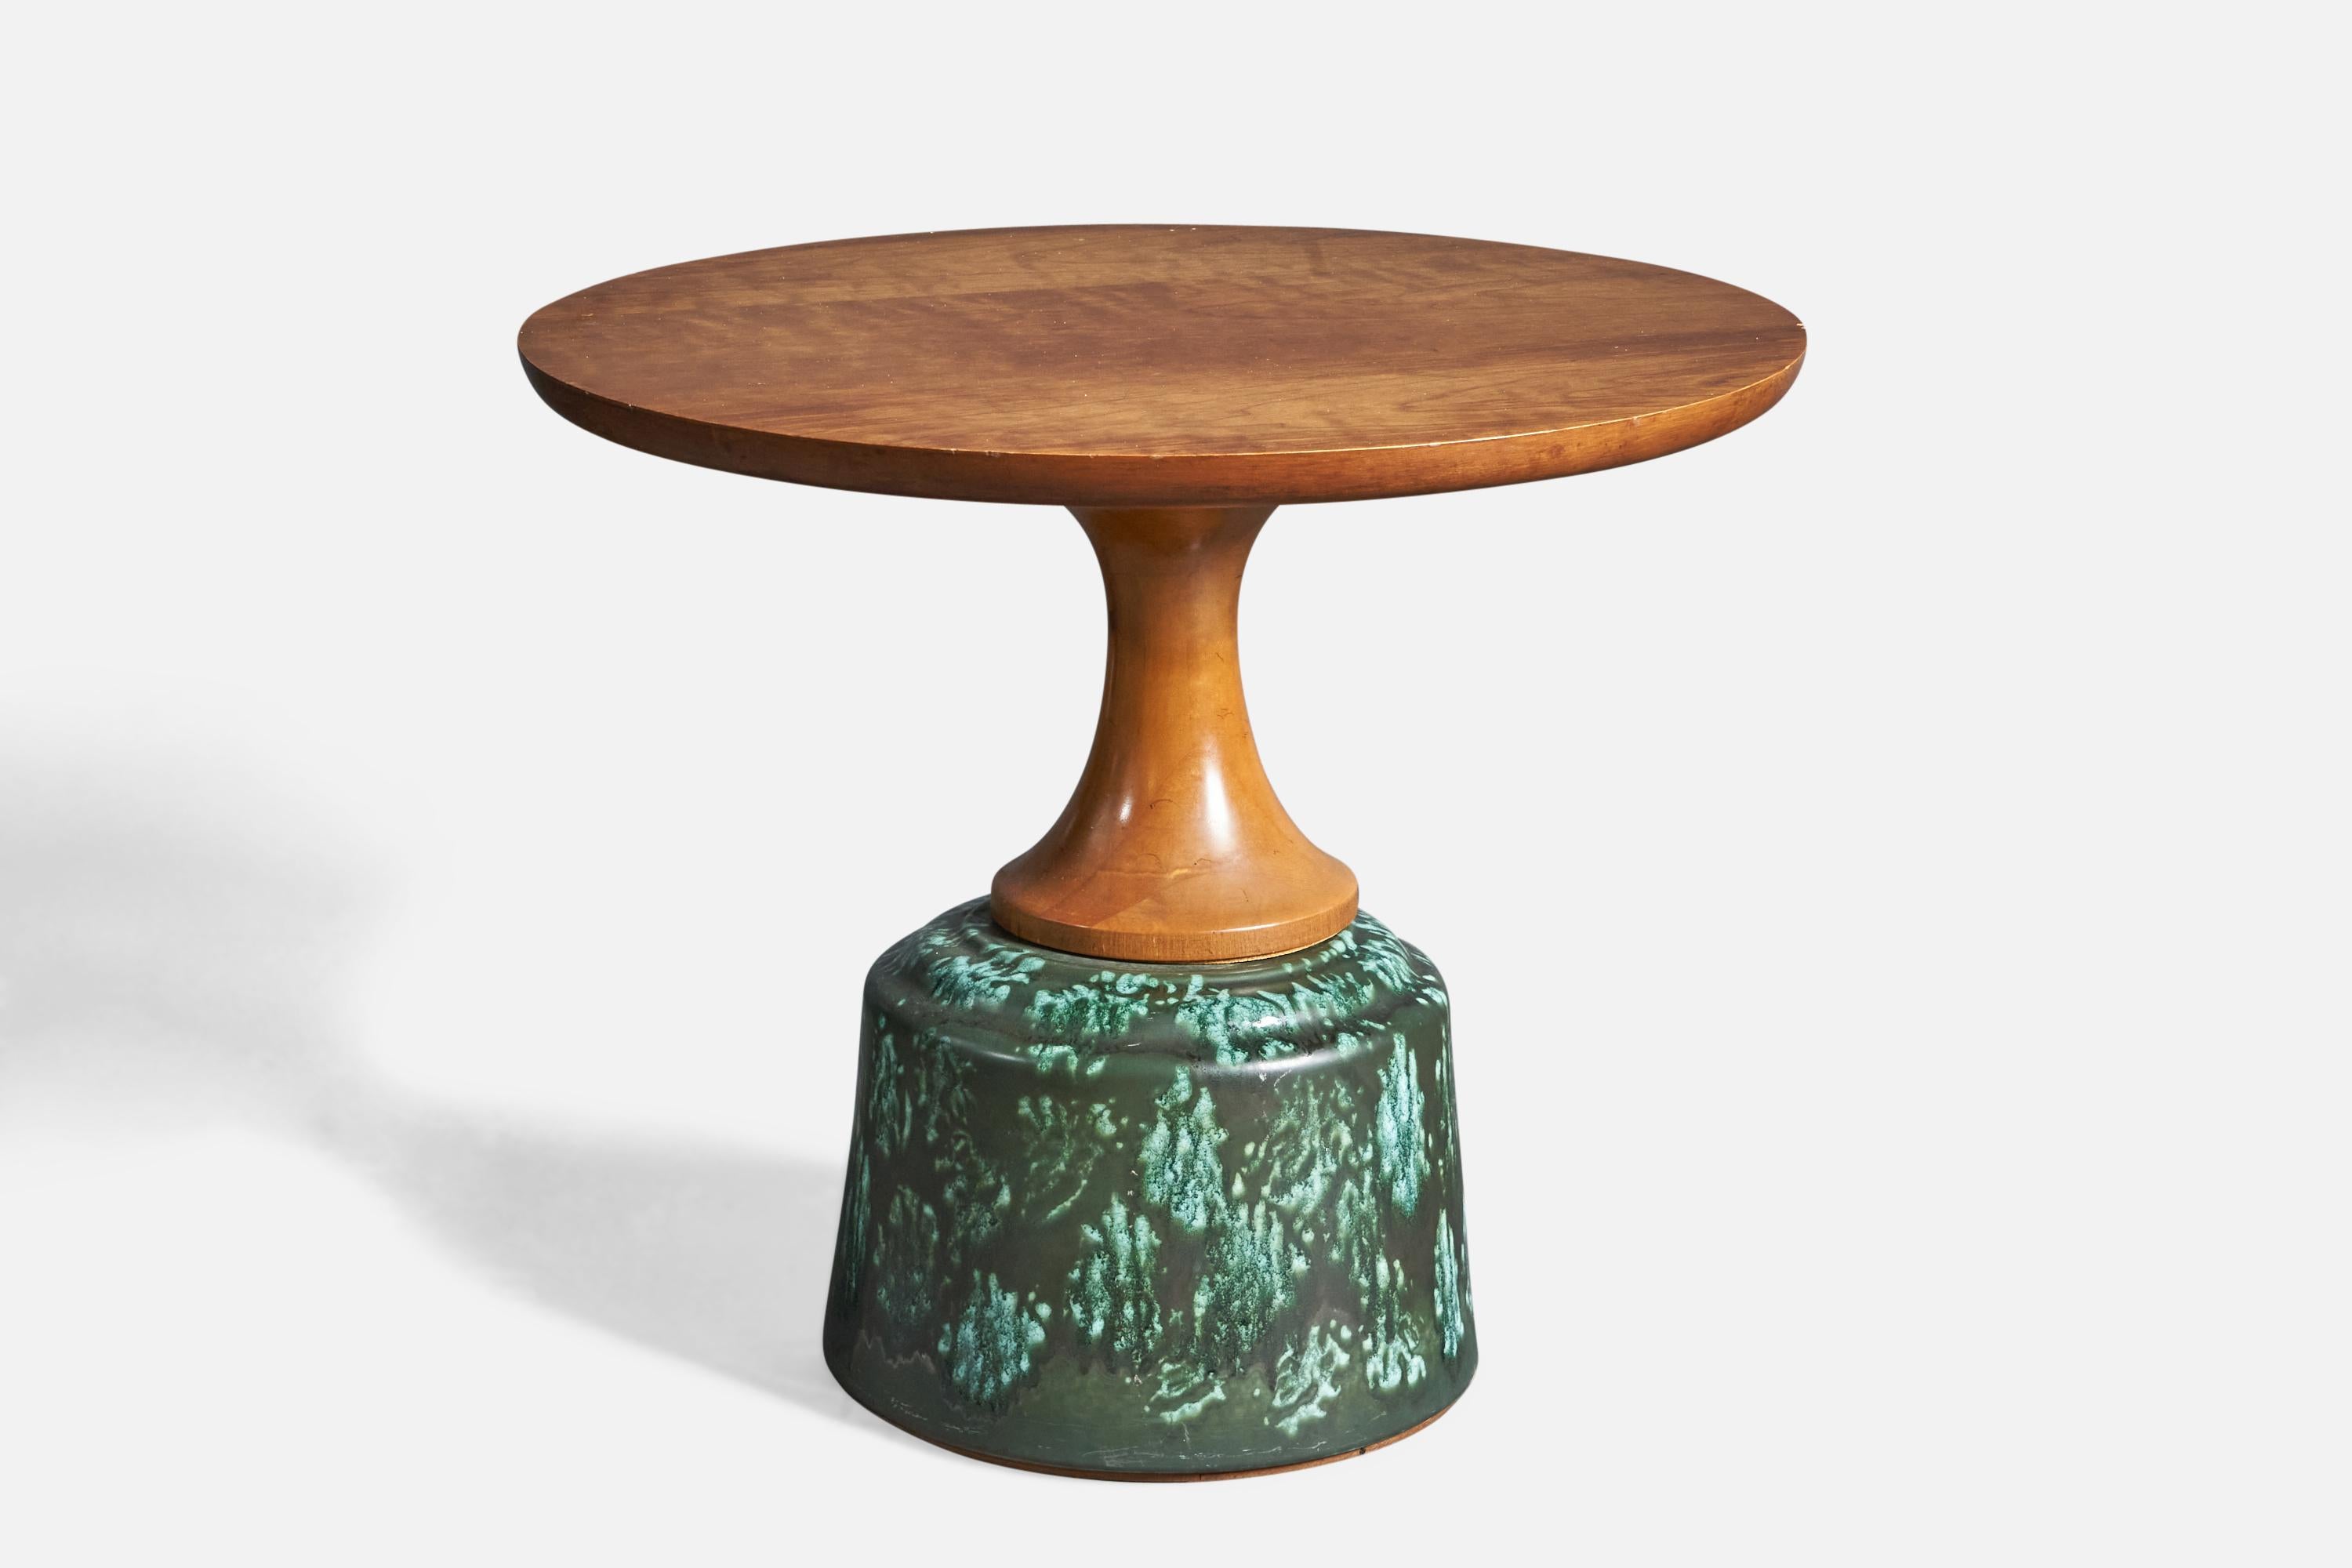 A walnut and green-glazed ceramic side table, designed by John Van Koert and produced by Drexel, USA, c. 1950s.